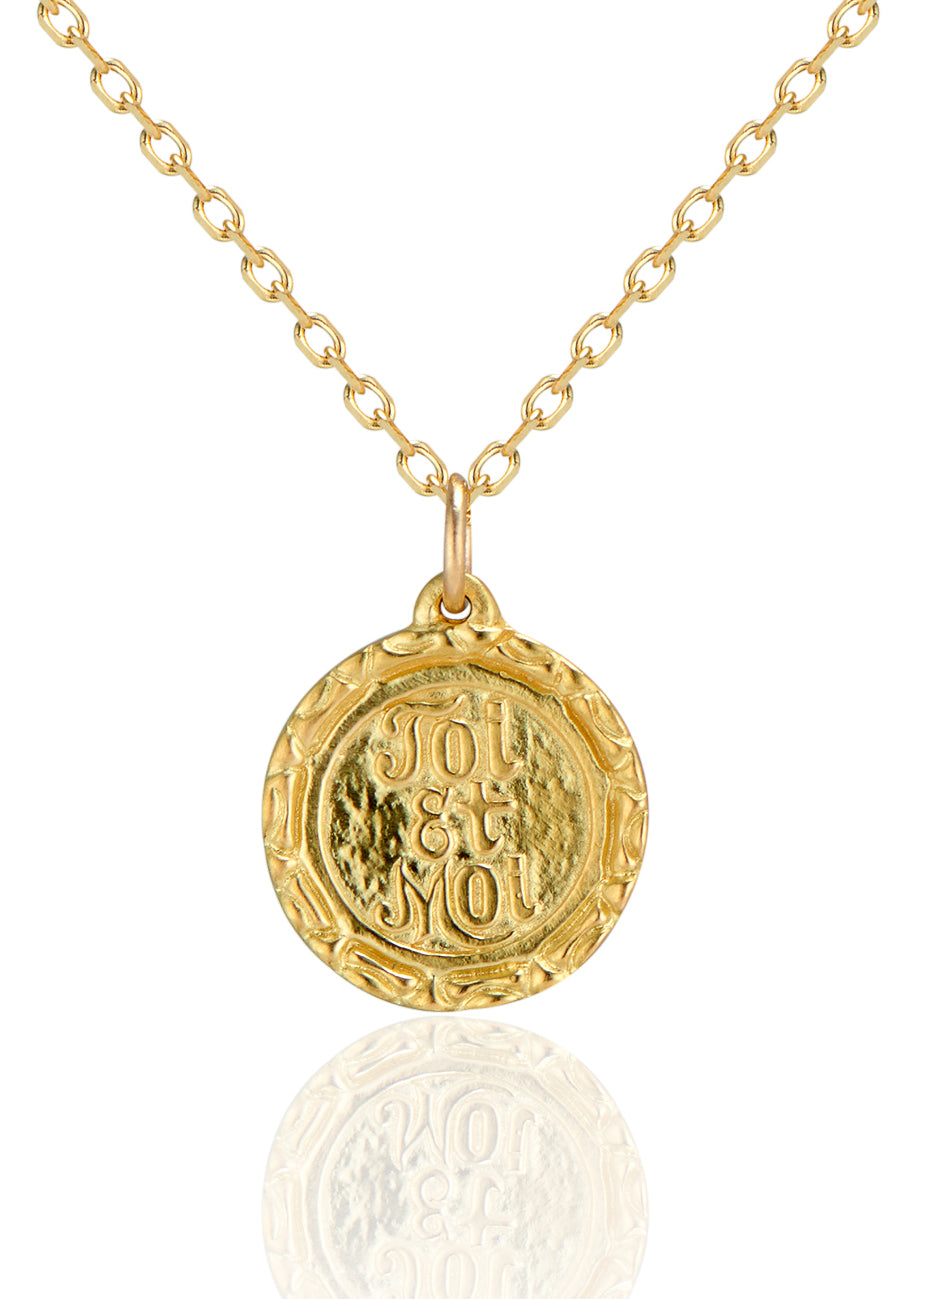 Inspired by “toi et moi” engagement rings from centuries past, the Toi et Moi necklace is a gold pendant engraved by hand to read “Toi et Moi” on one side and “You and Me” on the other. Delicate carving on the edges showcases the beauty of the gold—a piece that’s romantic, sweet, and a promise of things to come. 